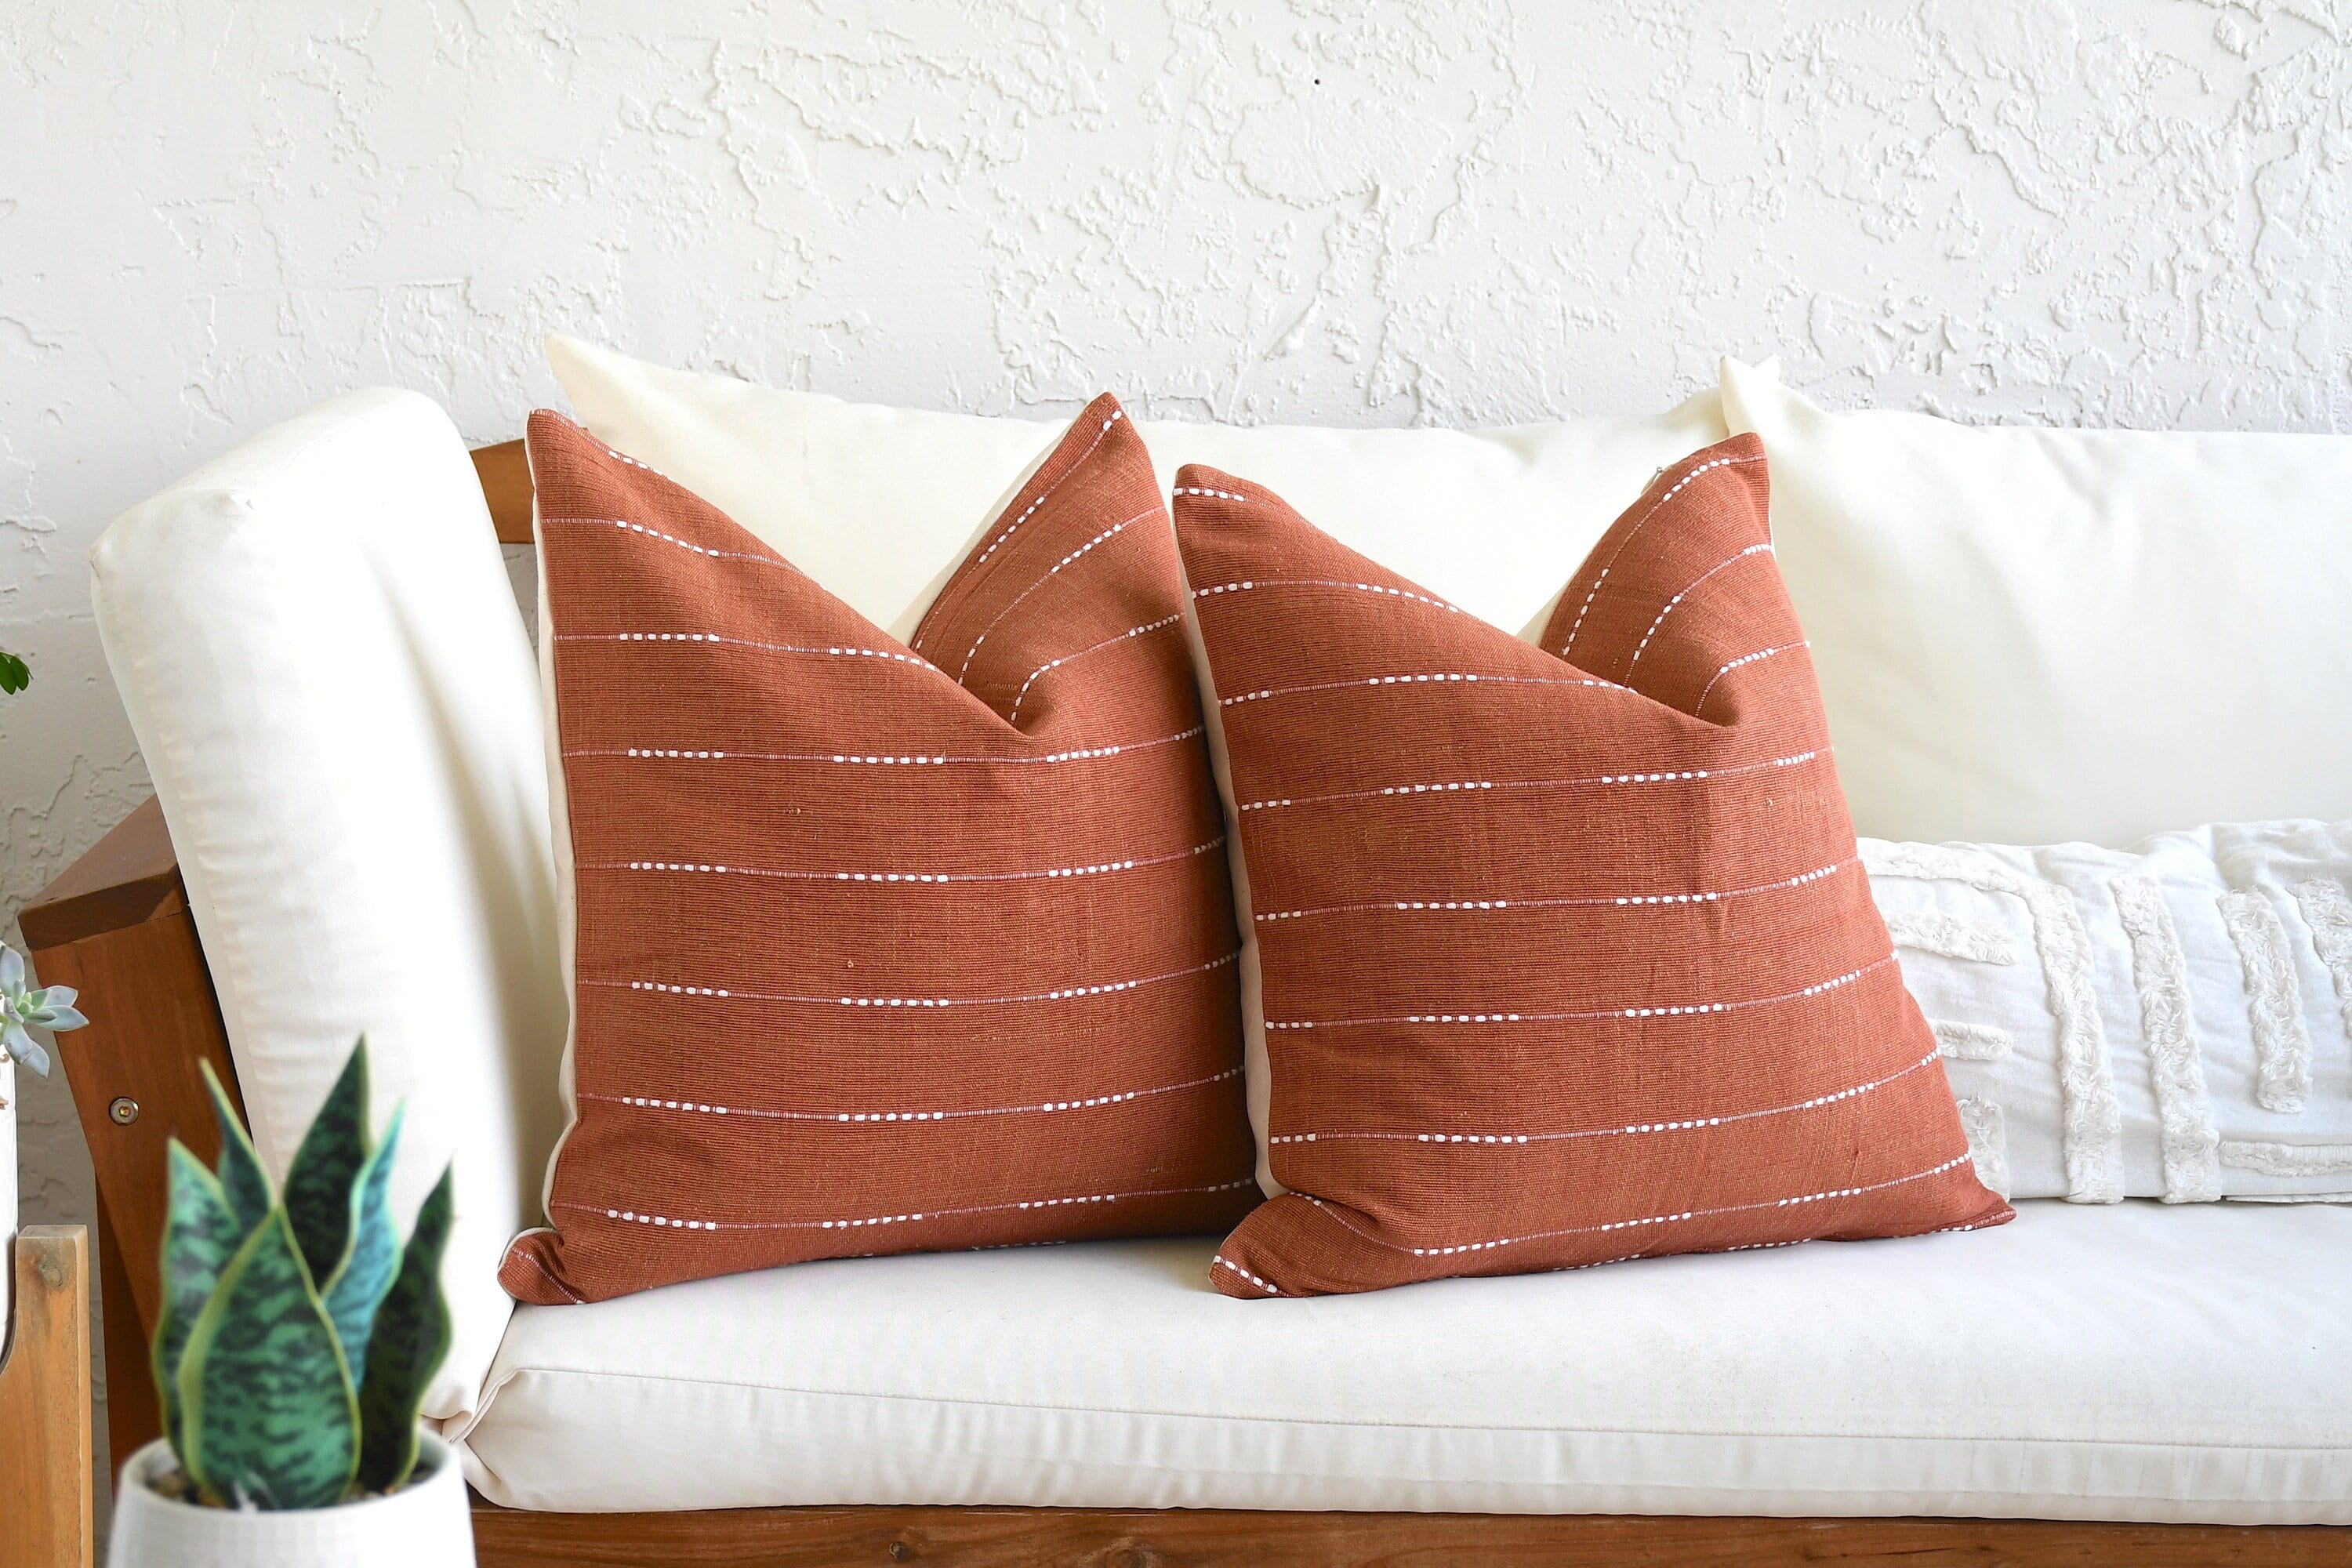 Orange Throw Pillow Covers 18x18, Woven Tufted Boho Pillow Cover with  Tassels, Burnt Orange Pillow Covers for Couch Sofa Bedroom